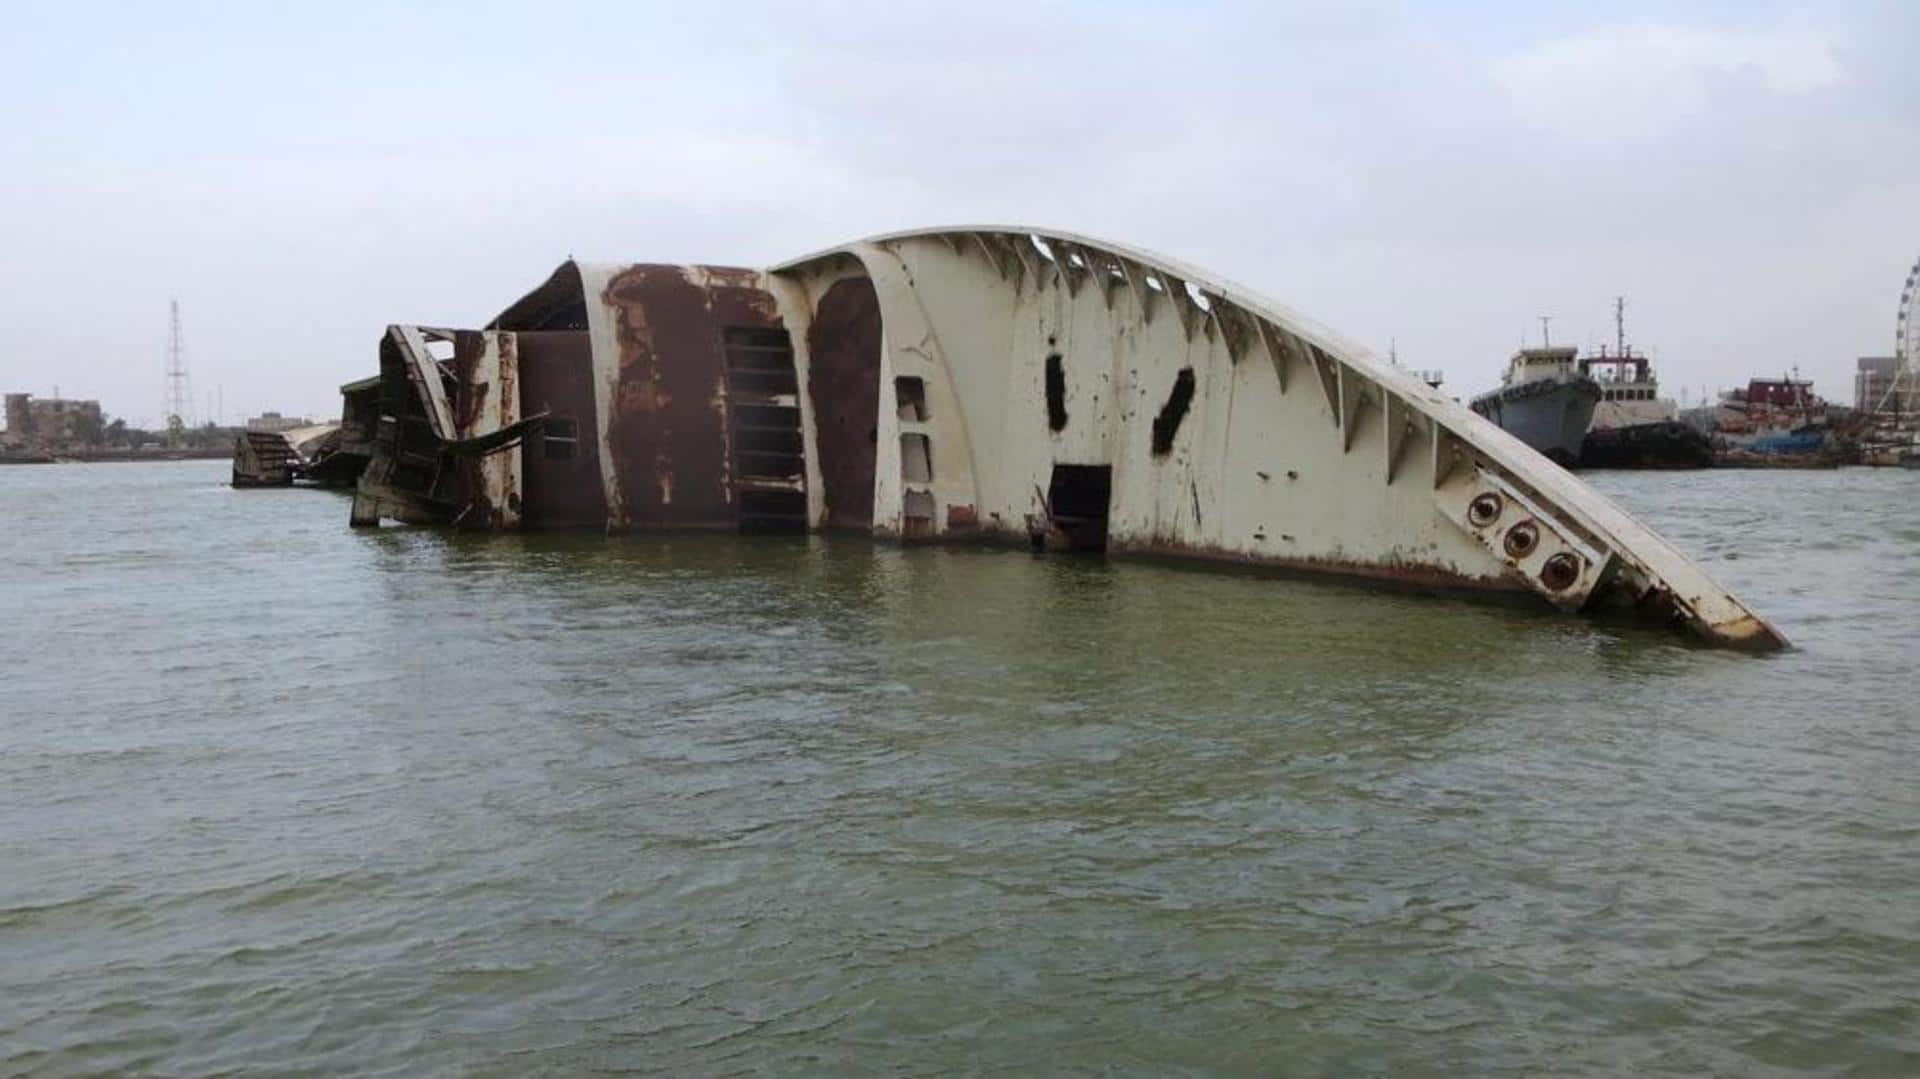 Saddam Hussein's capsized yacht picnic spot for sightseers in Iraq